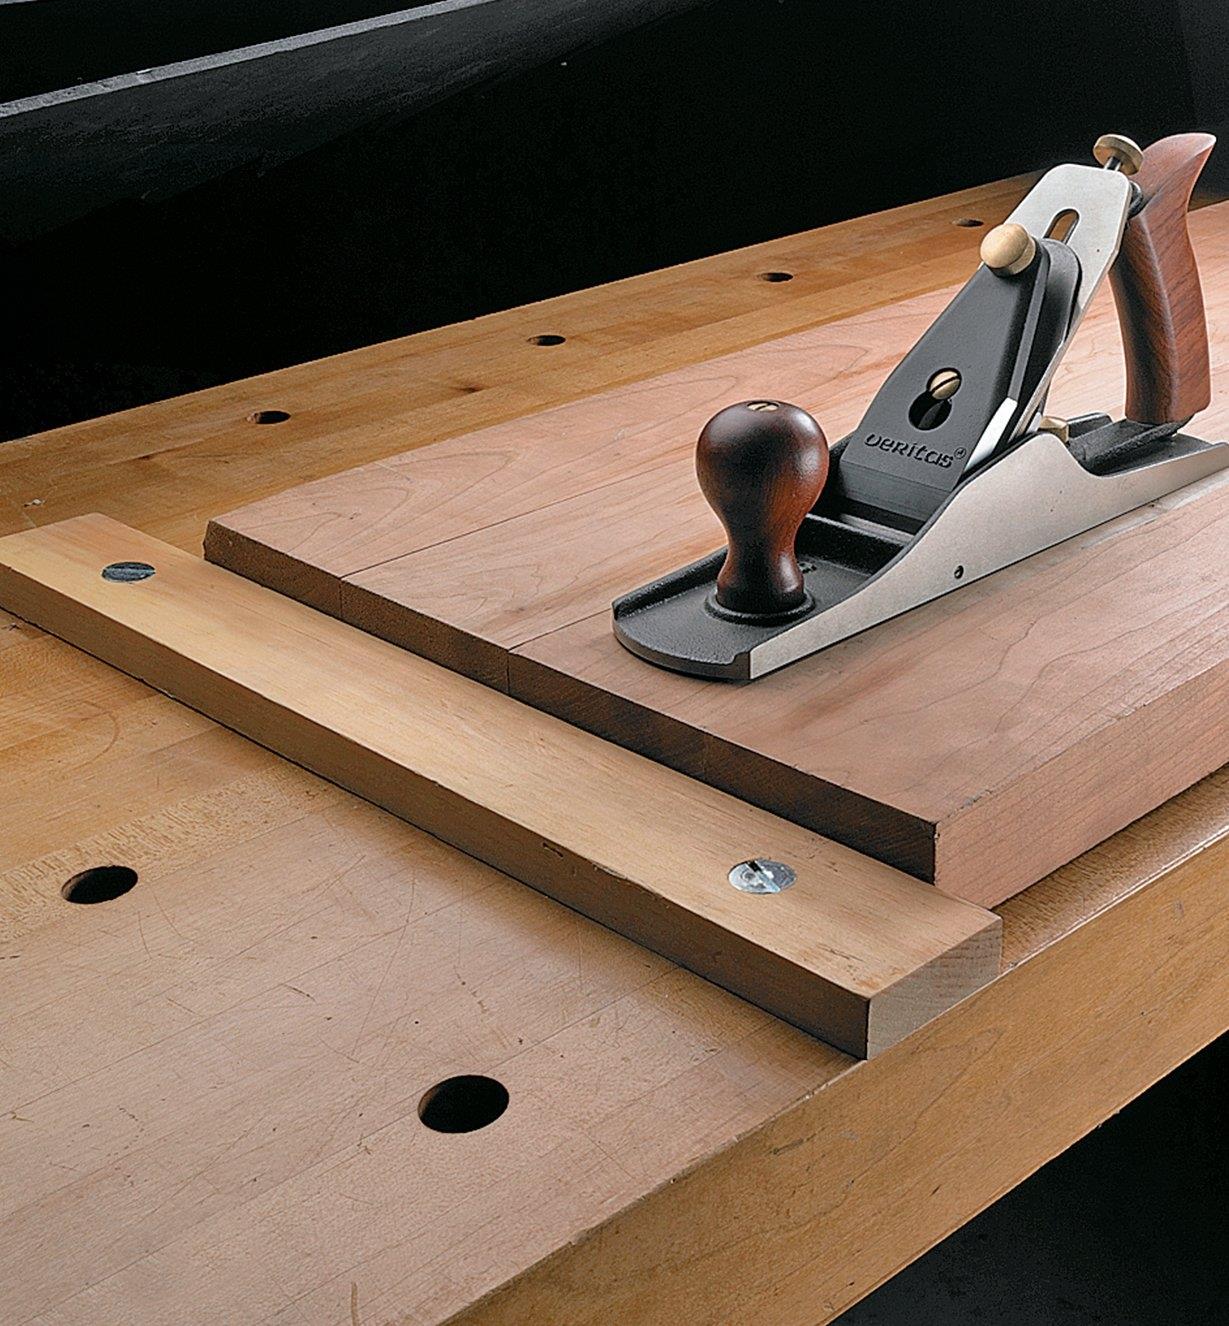 Planing stop attached to a workbench with two bench anchors and fasteners